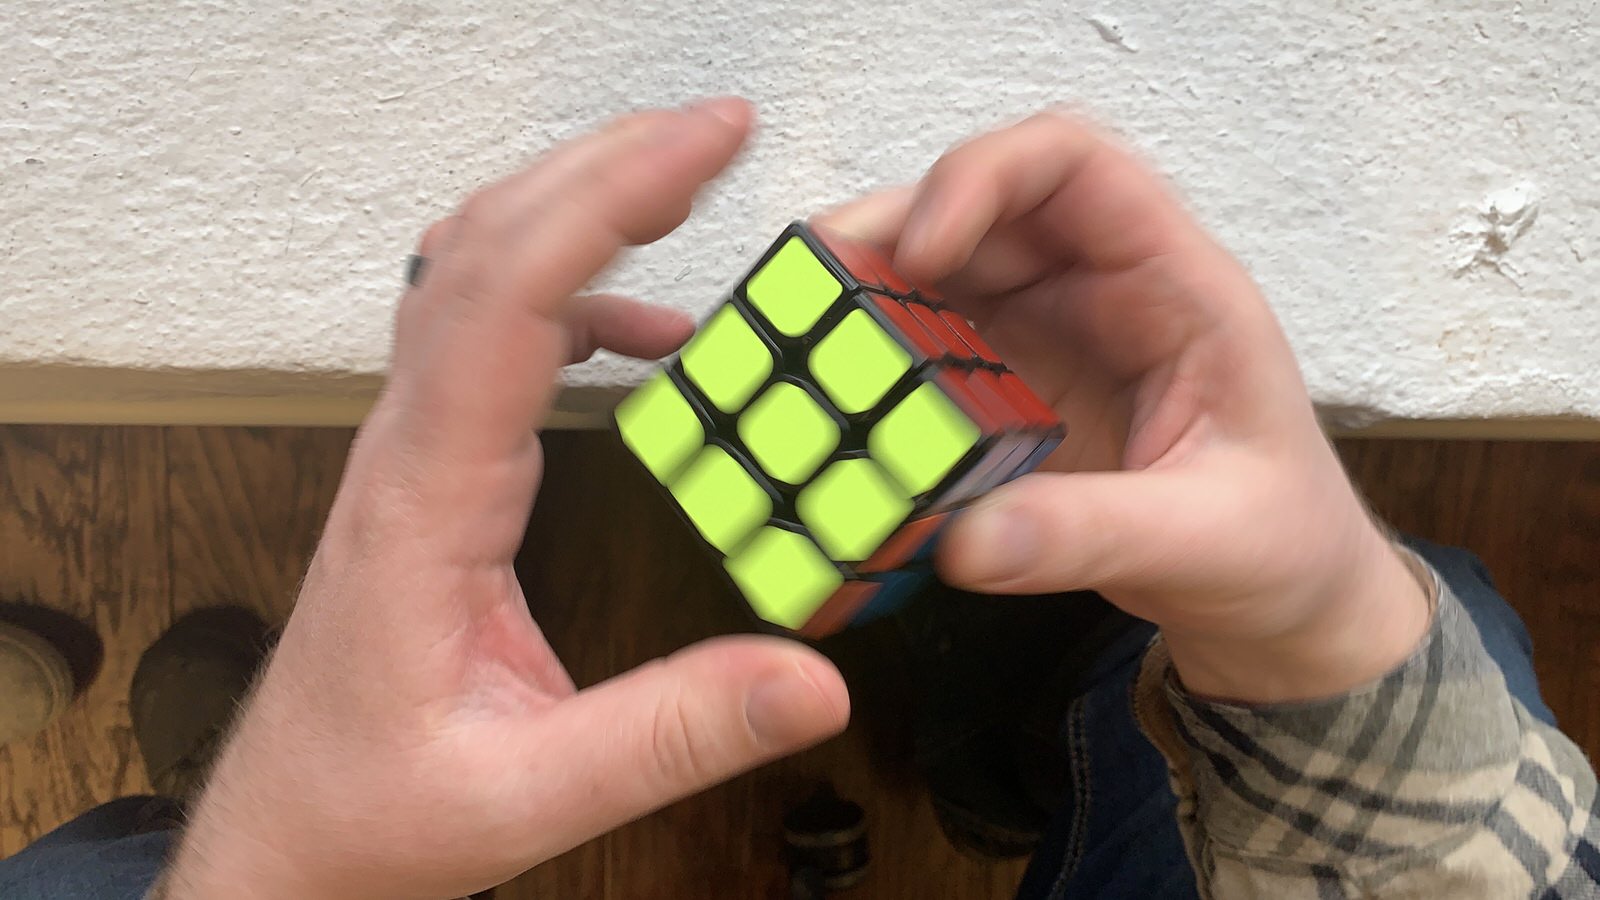 How is solving a Rubik’s cube like working with Gaslight to build your product?